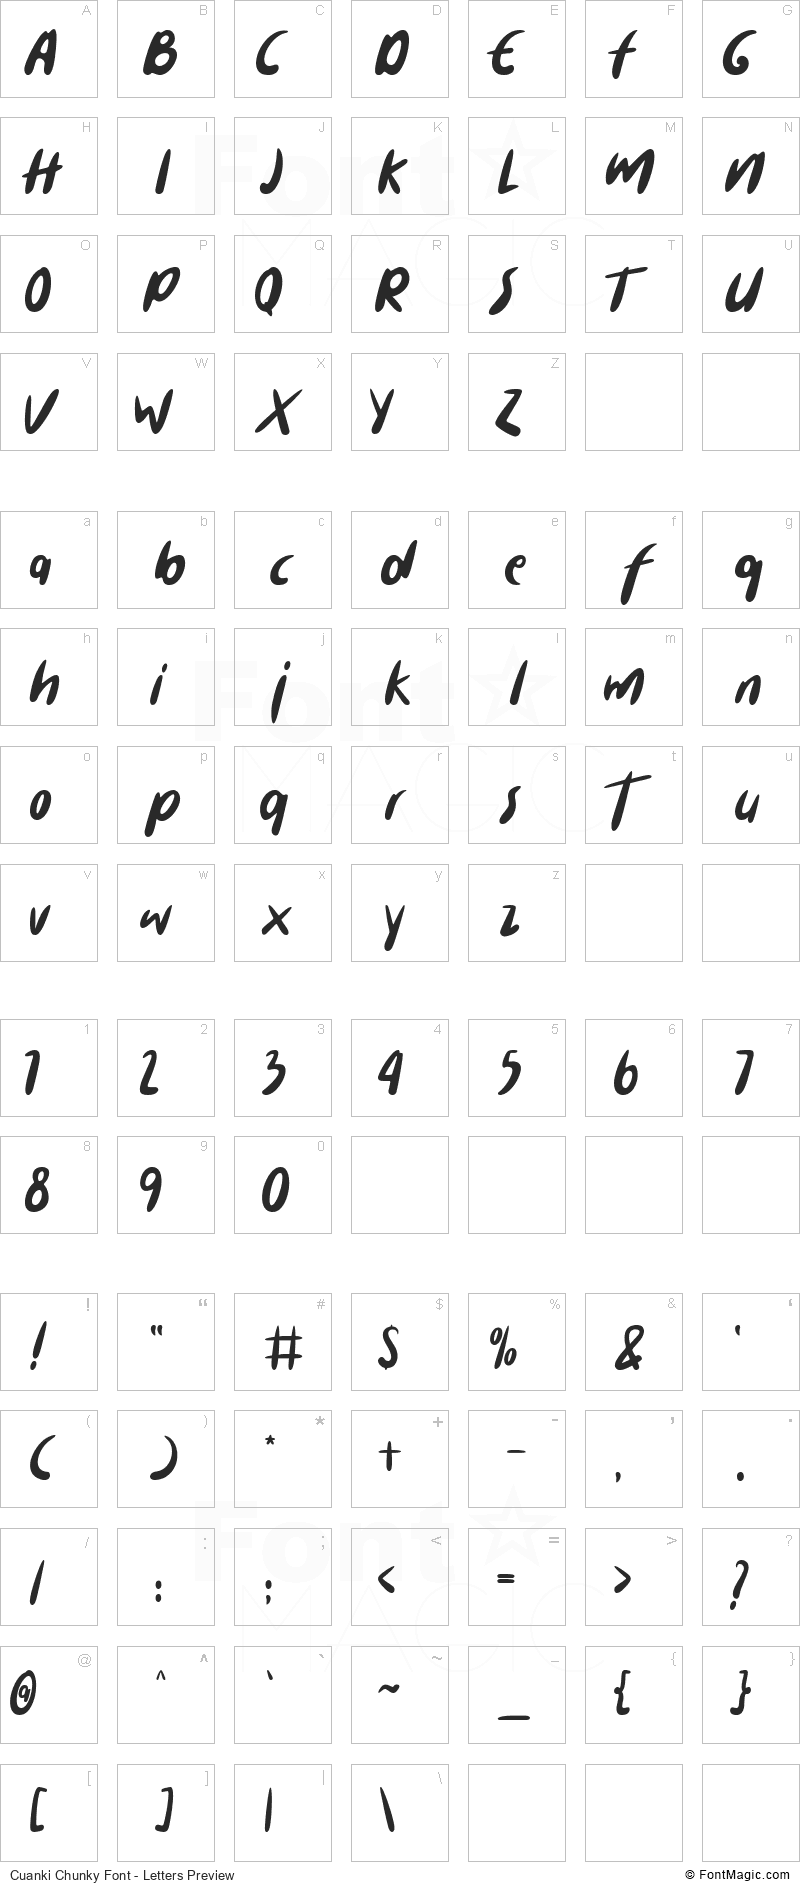 Cuanki Chunky Font - All Latters Preview Chart